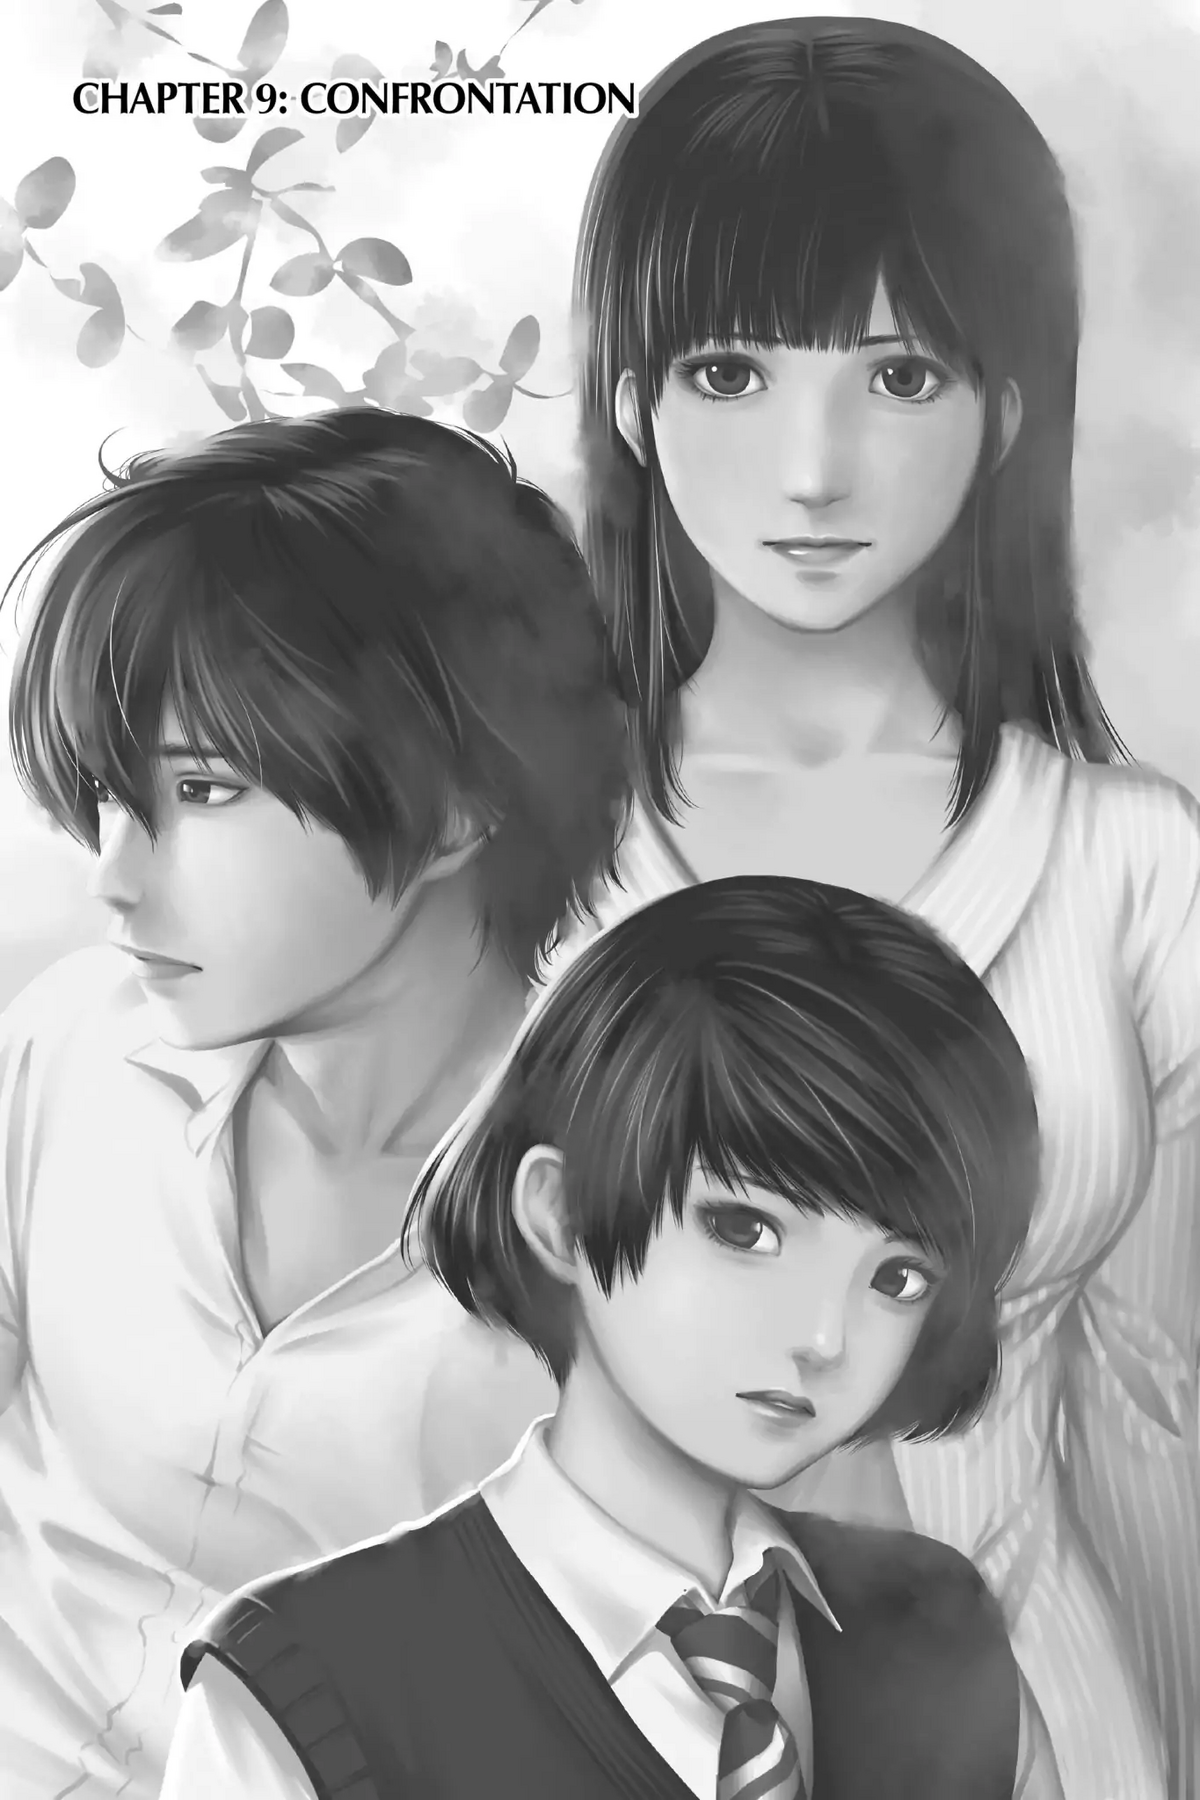 Domestic Girlfriend Manga Ends in 3 Chapters - News - Anime News Network